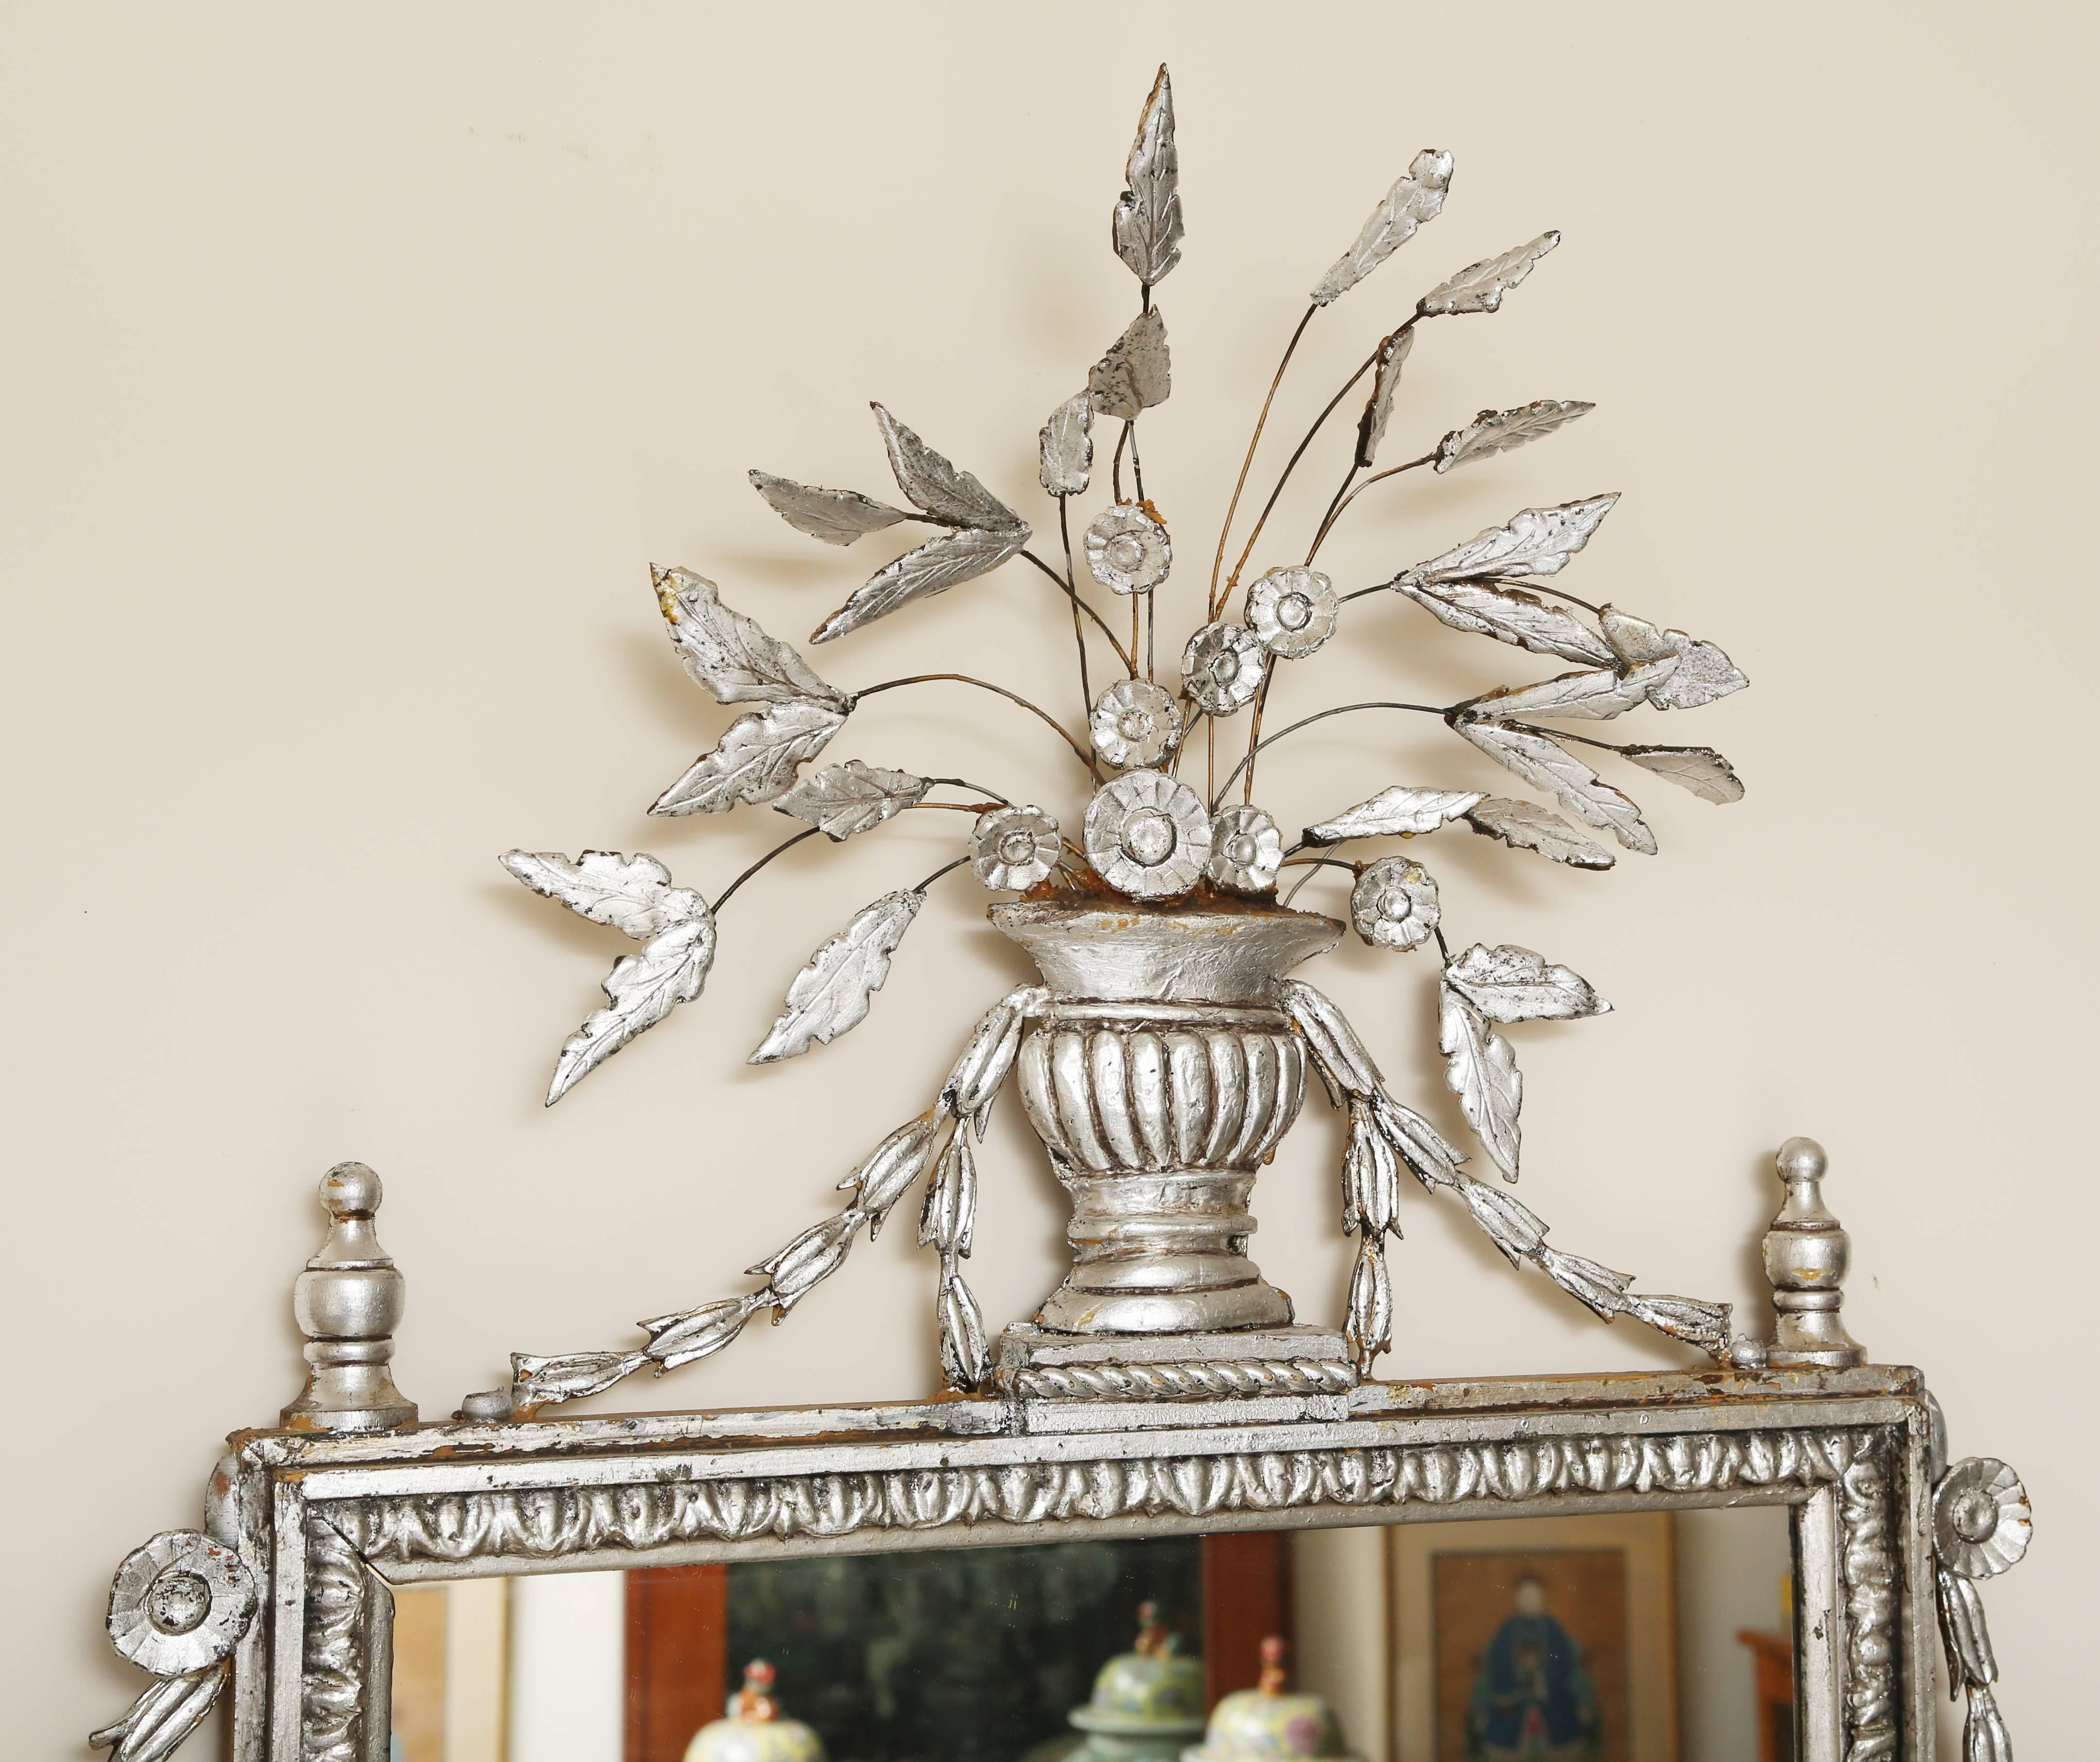 Large pair of silver leafed Italianate mirrors. The top of each mirror has an urn with an arrangement of stemmed leaves. The top, sides and bottom are decorated with swags of bellflowers. The bottom of the mirror rests on feet typical of the Italian